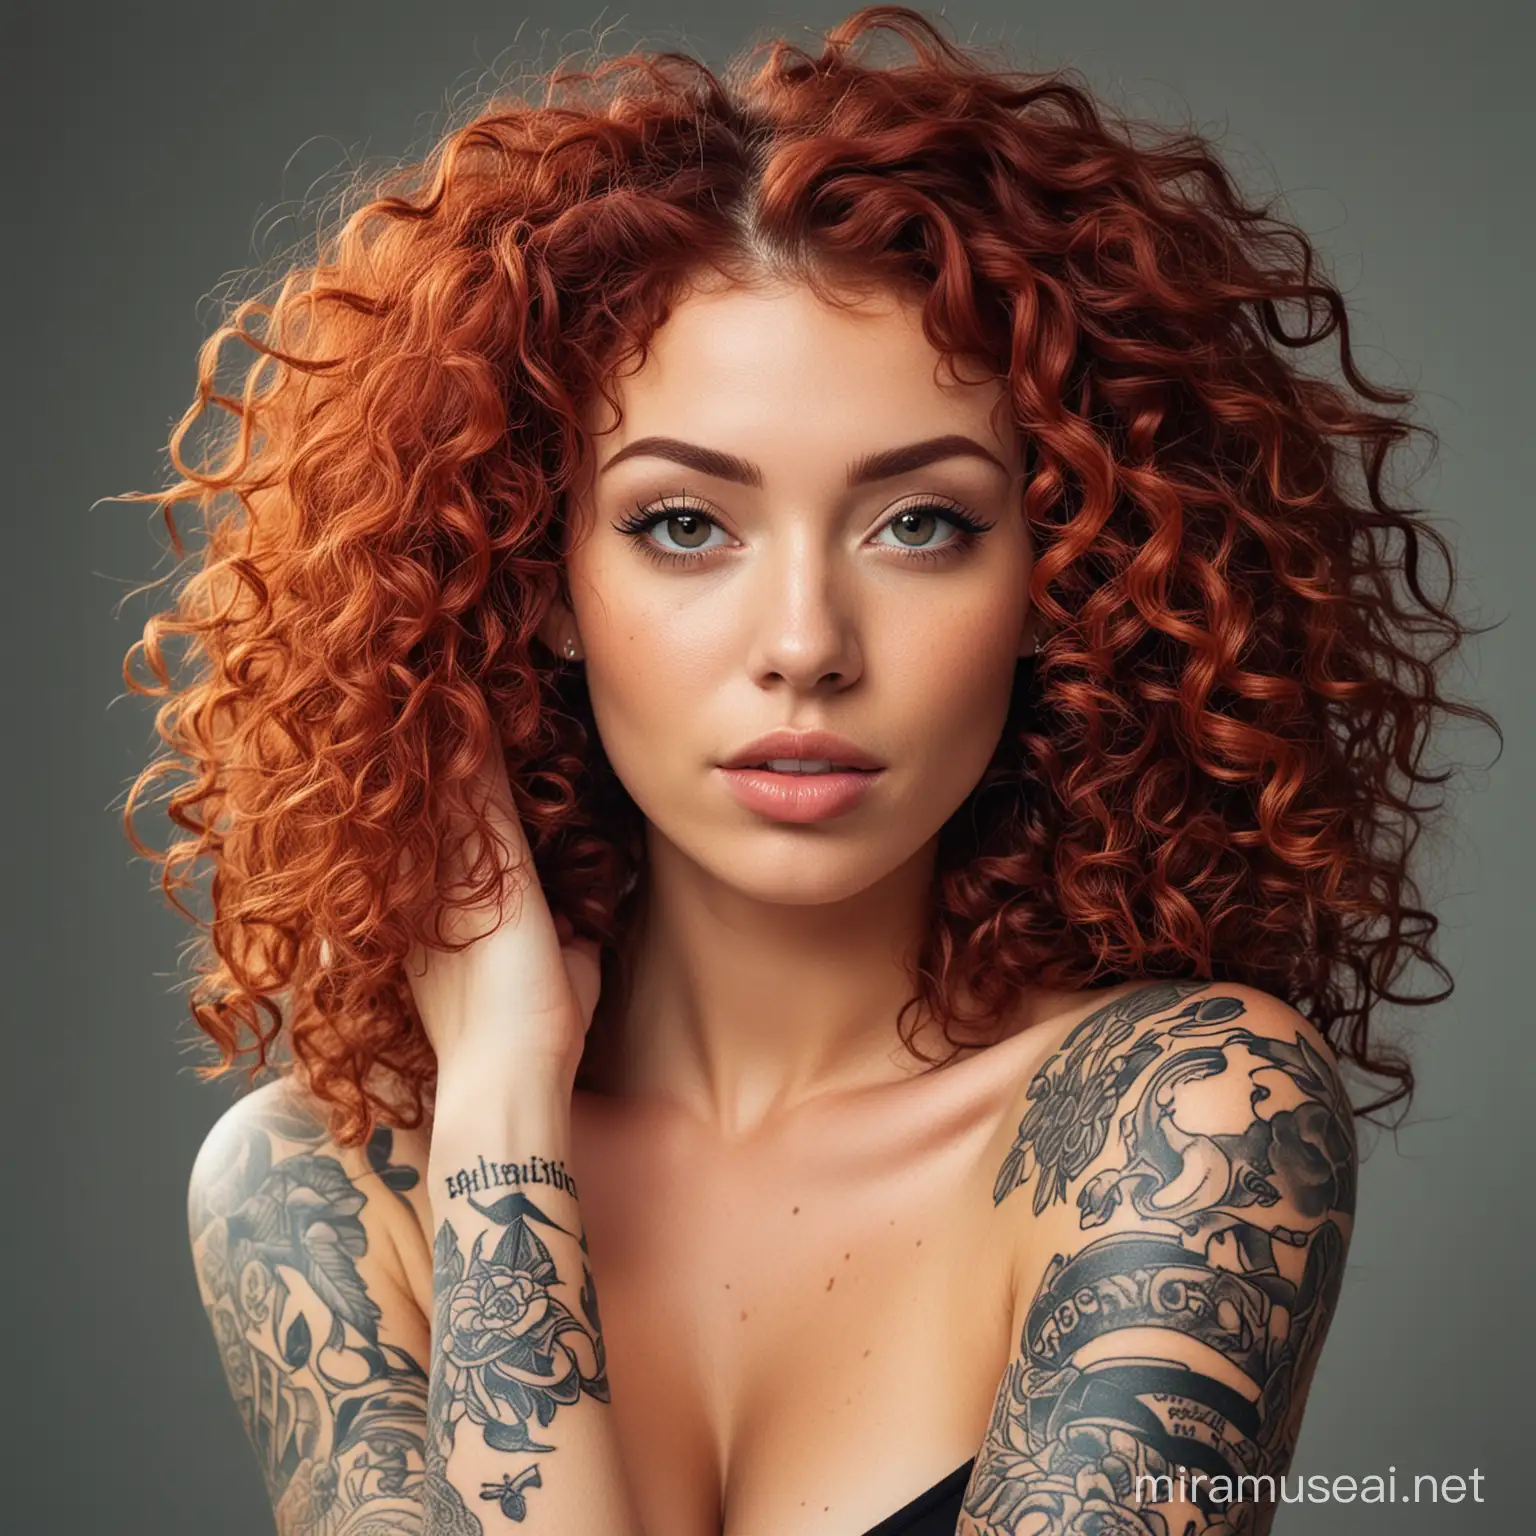 RedHaired Woman with Tattoos Bold and Vibrant Portrait